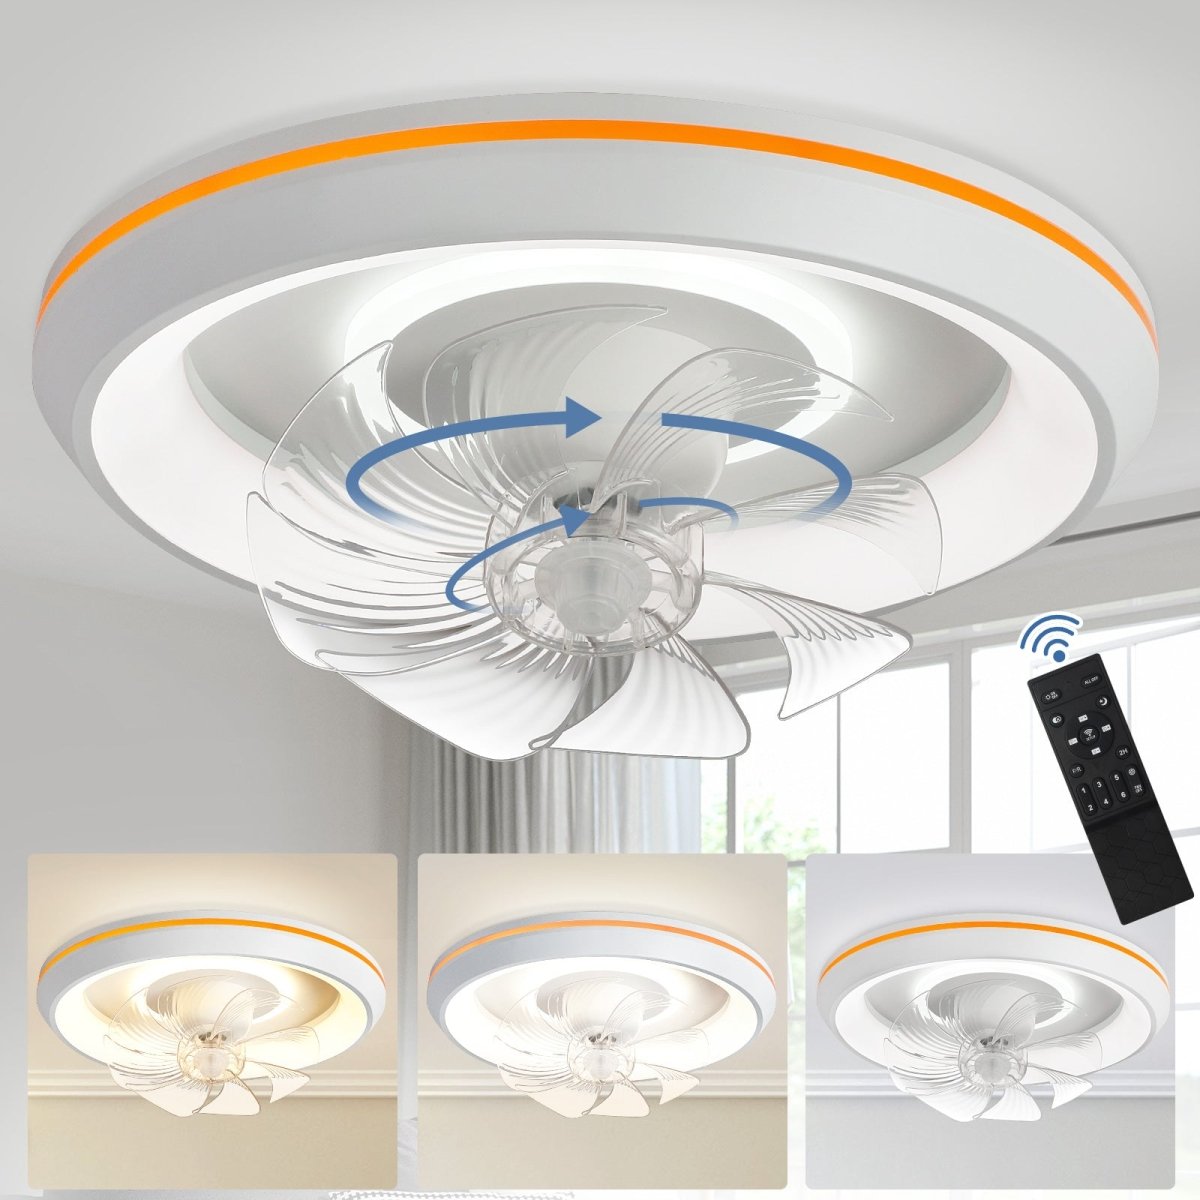 DLLT Modern 360-Degree Rotation Low Profile Ceiling Fans with Lights and Remote, Dimmable LED Reversible Timing, Ceiling Fans with Lights 3 Colors 6 Speeds Bladeless for Bedroom, Kitchen, 19’’, White - WS-FPZ54-30C-WH 2 | DEPULEY